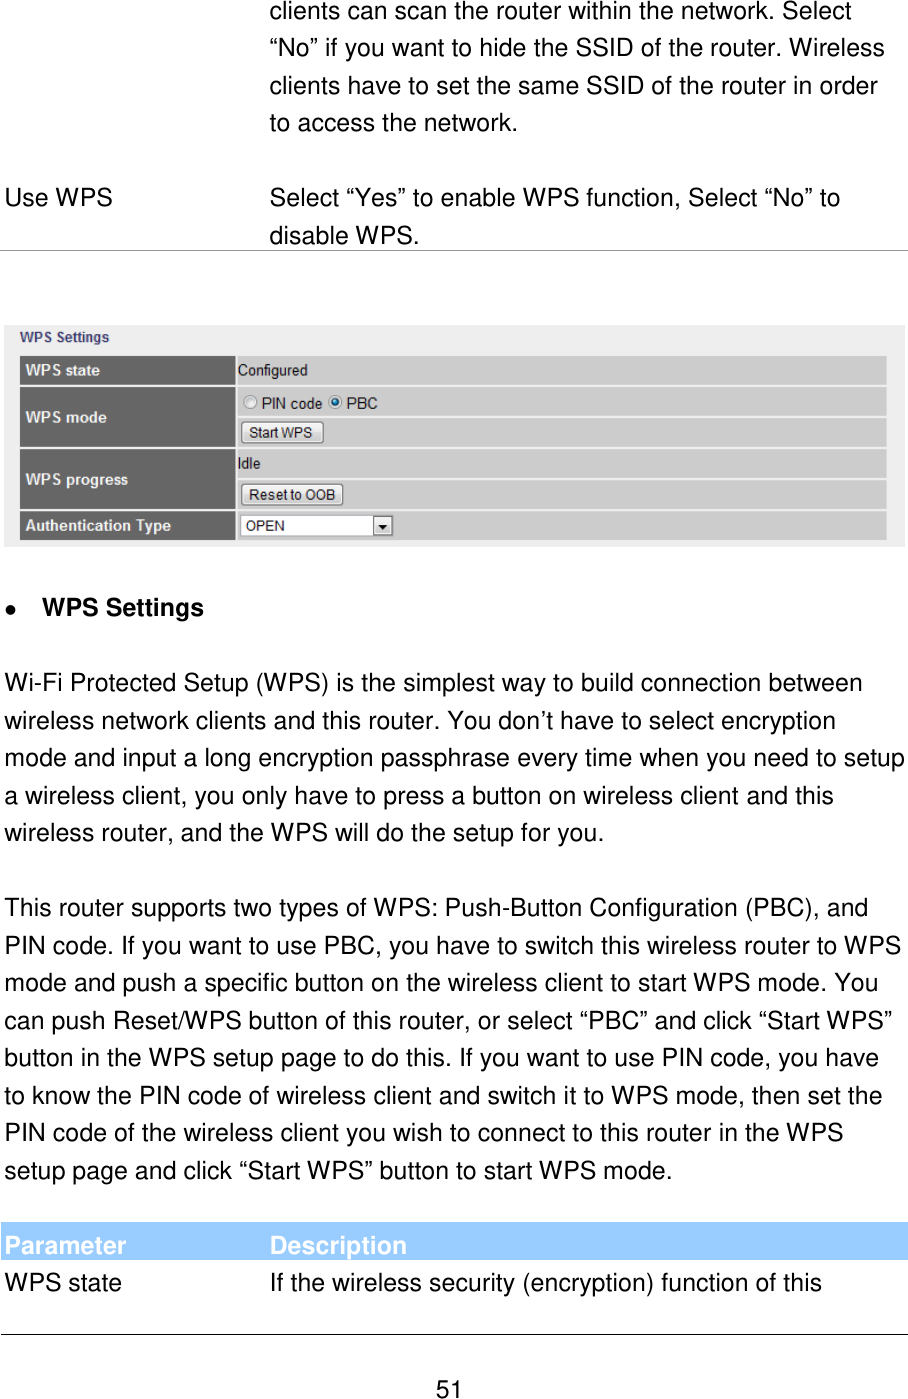   51 clients can scan the router within the network. Select “No” if you want to hide the SSID of the router. Wireless clients have to set the same SSID of the router in order to access the network.   Use WPS Select “Yes” to enable WPS function, Select “No” to disable WPS.      WPS Settings  Wi-Fi Protected Setup (WPS) is the simplest way to build connection between wireless network clients and this router. You don‟t have to select encryption mode and input a long encryption passphrase every time when you need to setup a wireless client, you only have to press a button on wireless client and this wireless router, and the WPS will do the setup for you.  This router supports two types of WPS: Push-Button Configuration (PBC), and PIN code. If you want to use PBC, you have to switch this wireless router to WPS mode and push a specific button on the wireless client to start WPS mode. You can push Reset/WPS button of this router, or select “PBC” and click “Start WPS” button in the WPS setup page to do this. If you want to use PIN code, you have to know the PIN code of wireless client and switch it to WPS mode, then set the PIN code of the wireless client you wish to connect to this router in the WPS setup page and click “Start WPS” button to start WPS mode.   Parameter Description WPS state If the wireless security (encryption) function of this 